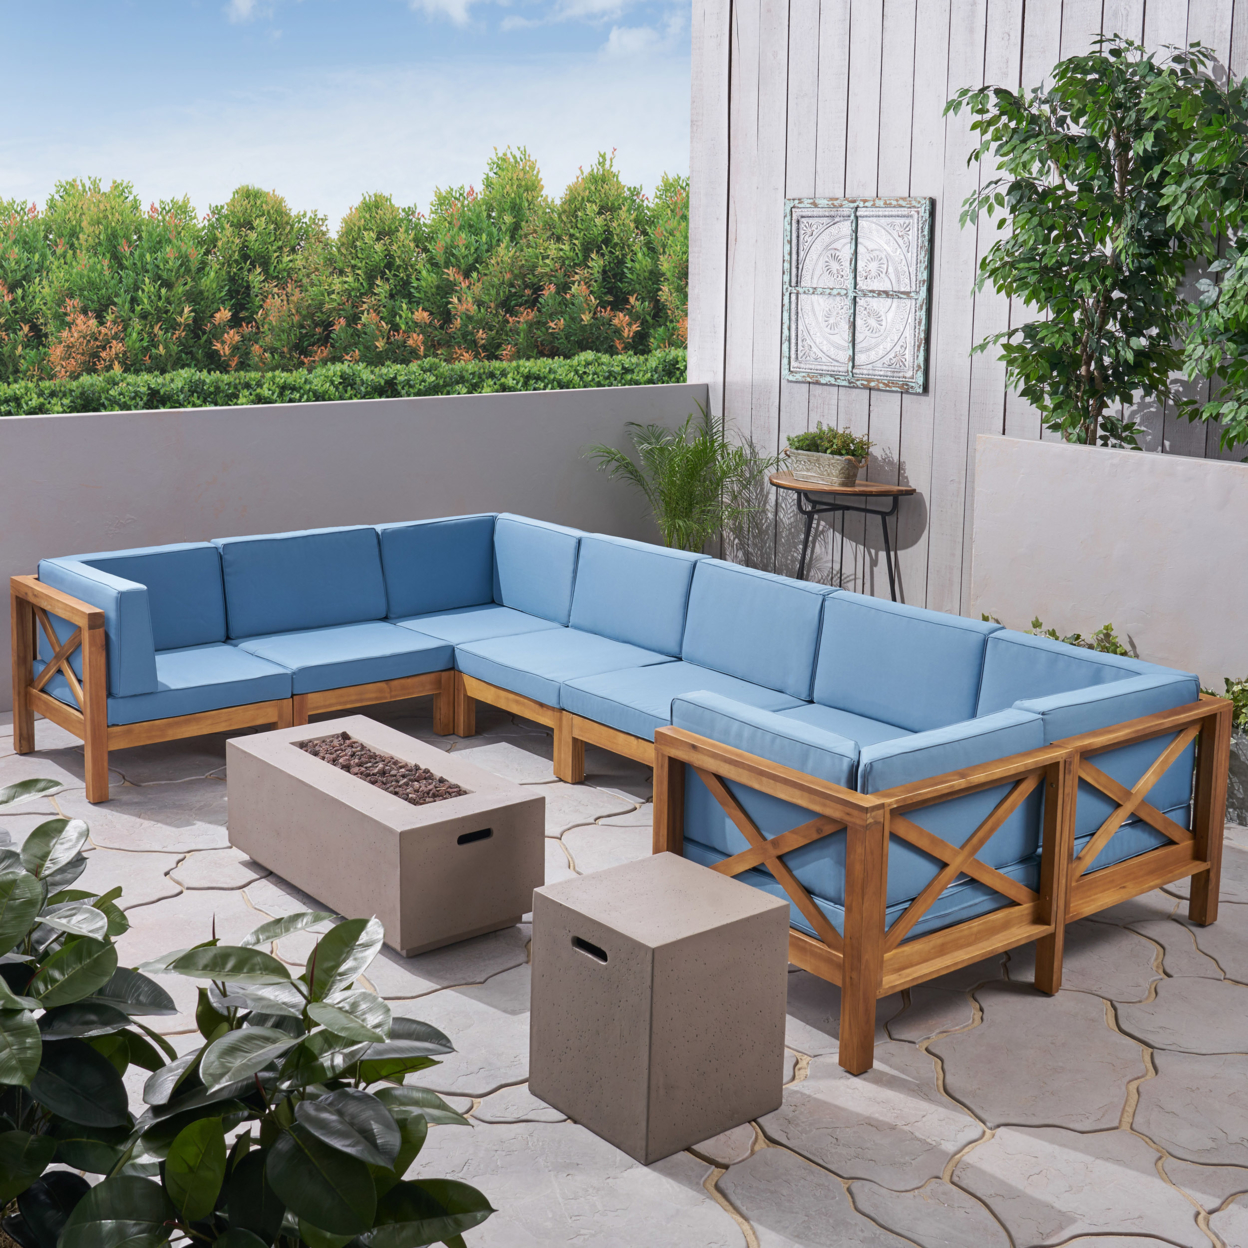 Cytheria Outdoor Acacia Wood 8 Seater U-Shaped Sectional Sofa Set With Fire Pit - Teak / Blue / Light Gray